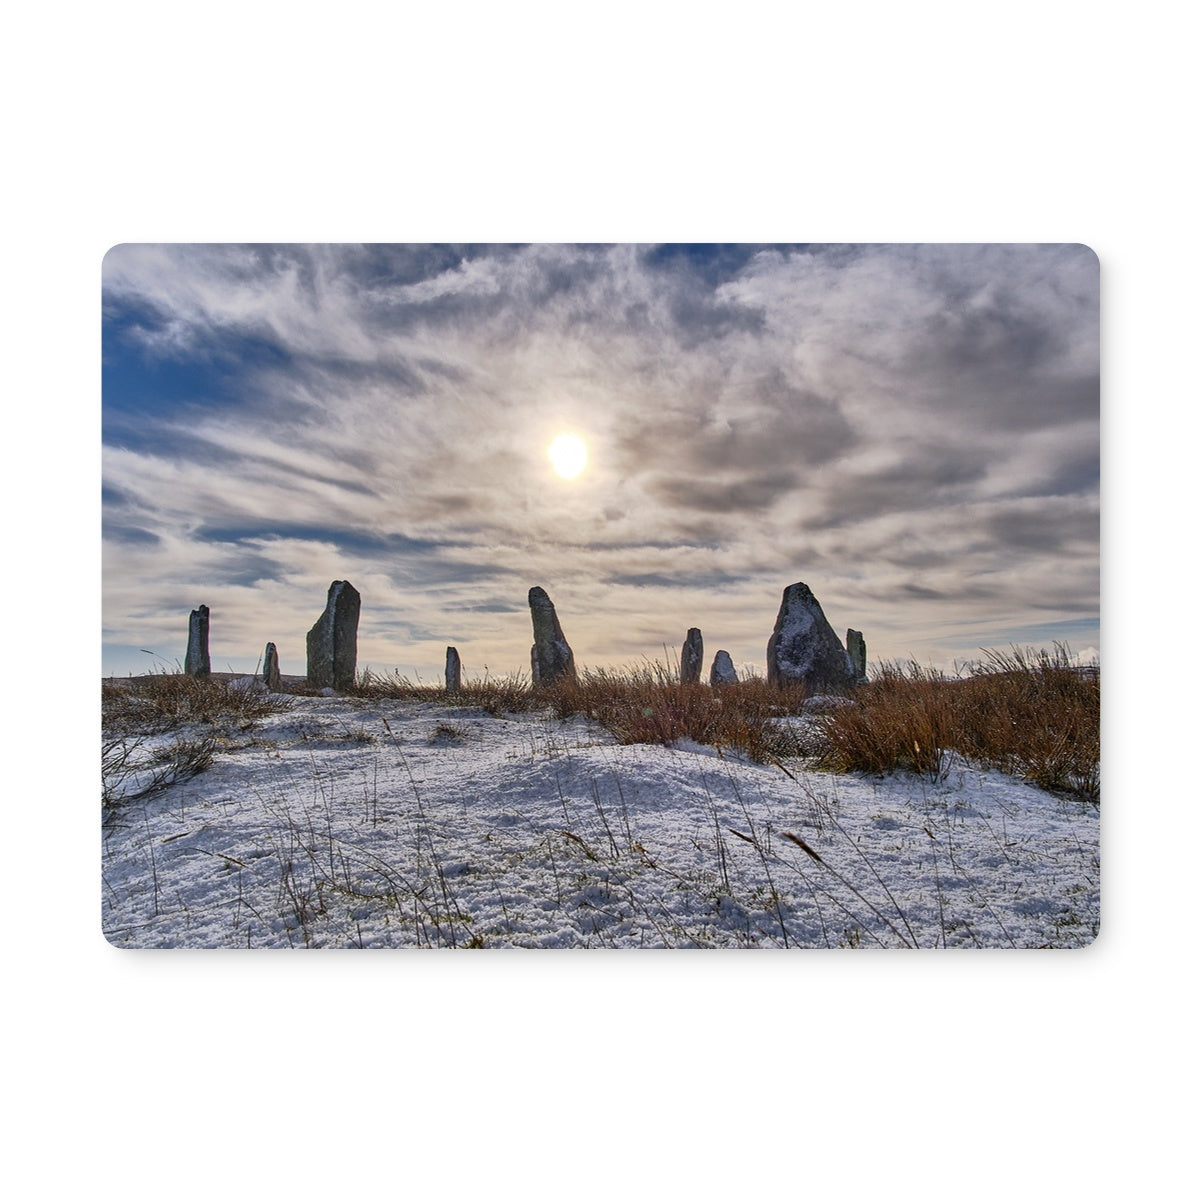 Cnoc Fillibhir Bheag/Callanish III in snow and sunshine Placemat